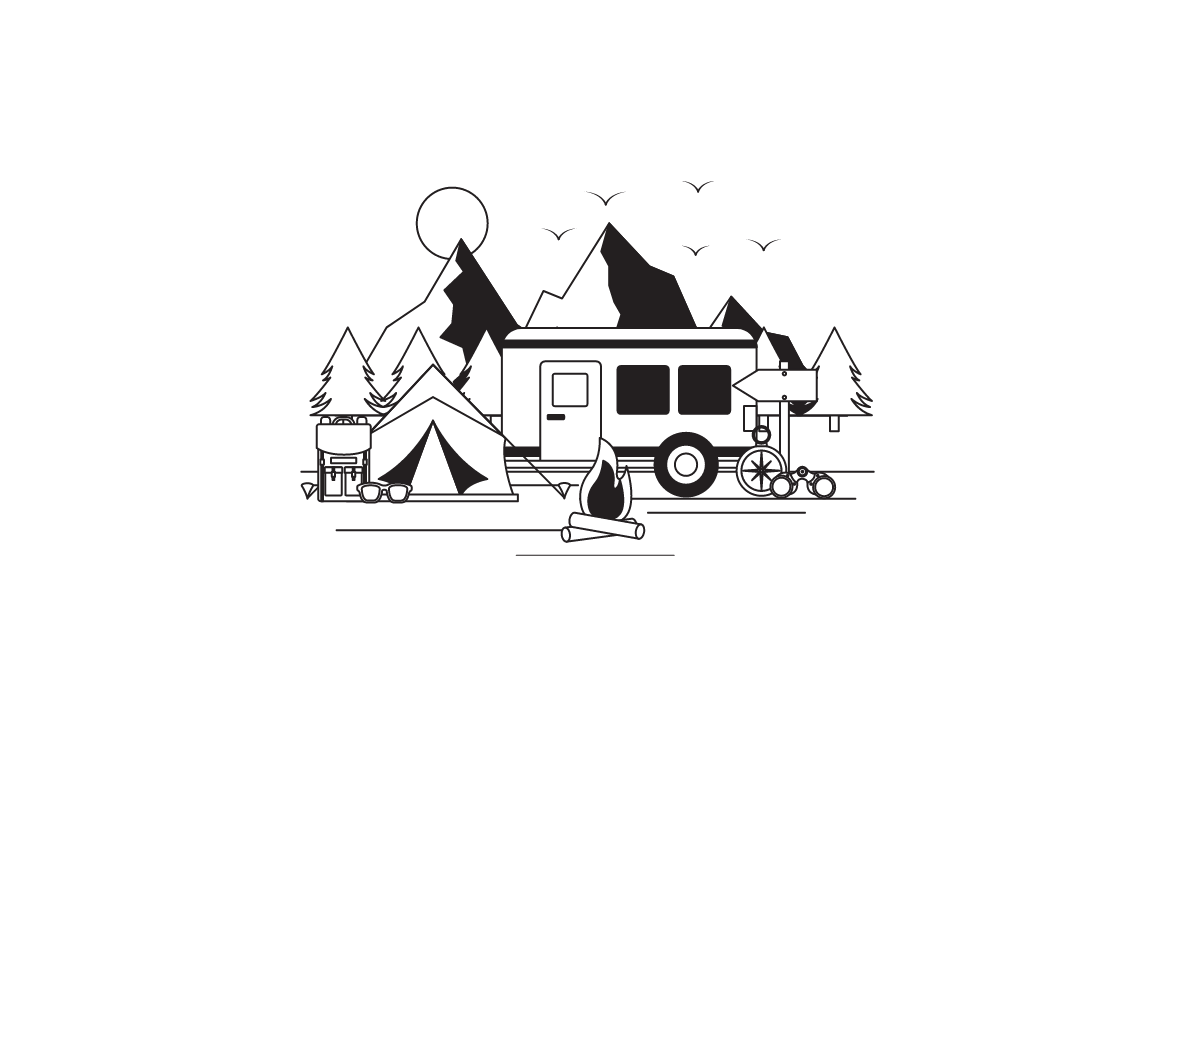 Charming Adventures of the Millers